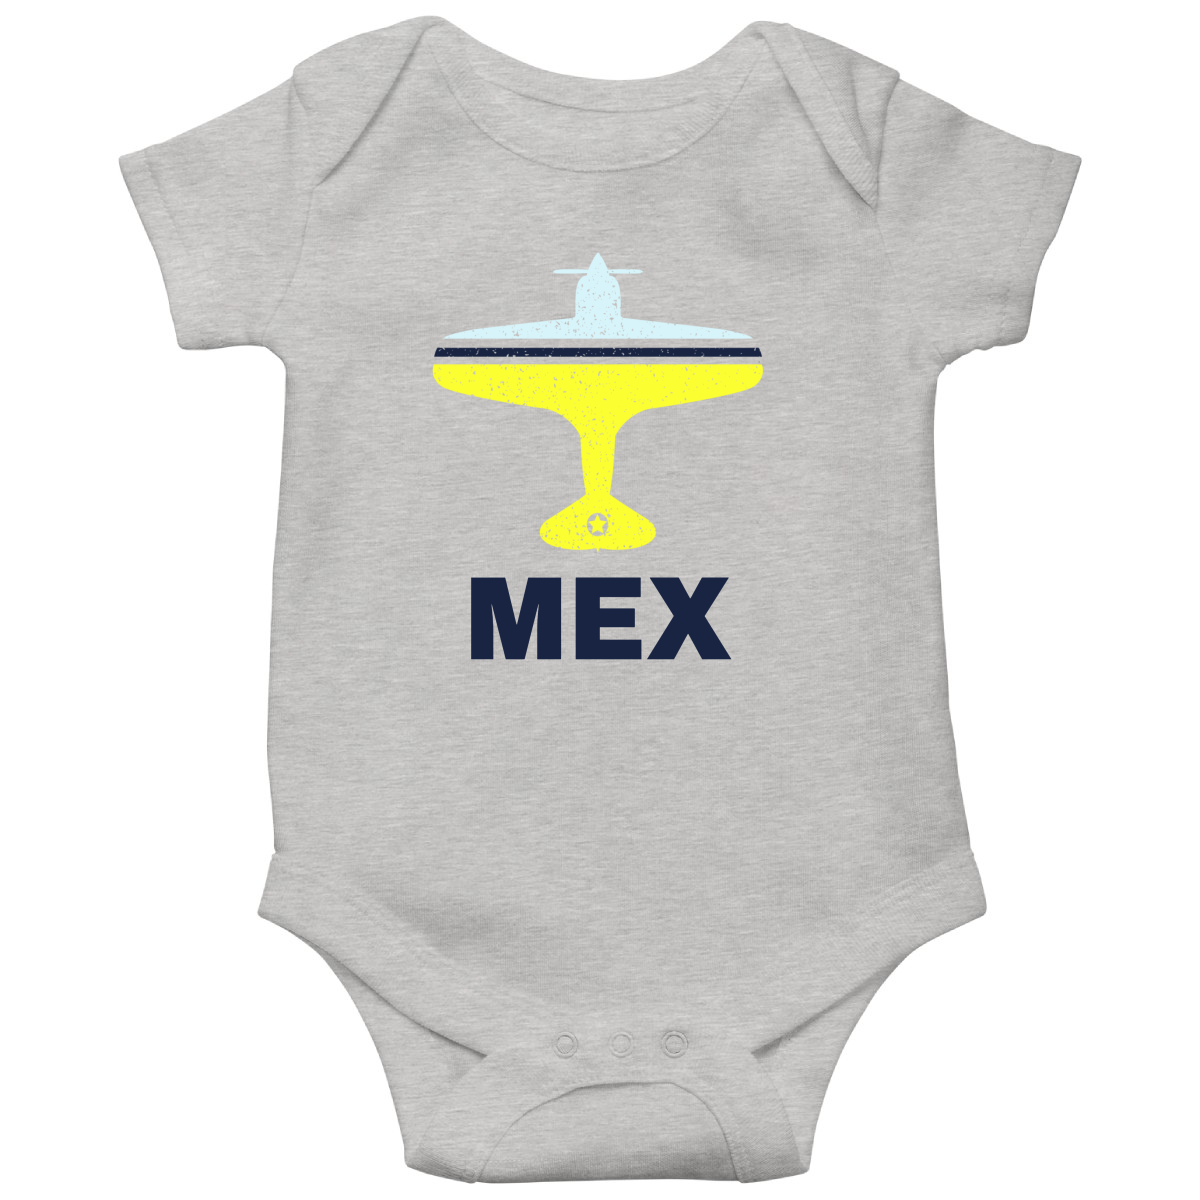 Fly Mexico City MEX Airport  Baby Bodysuits | Gray